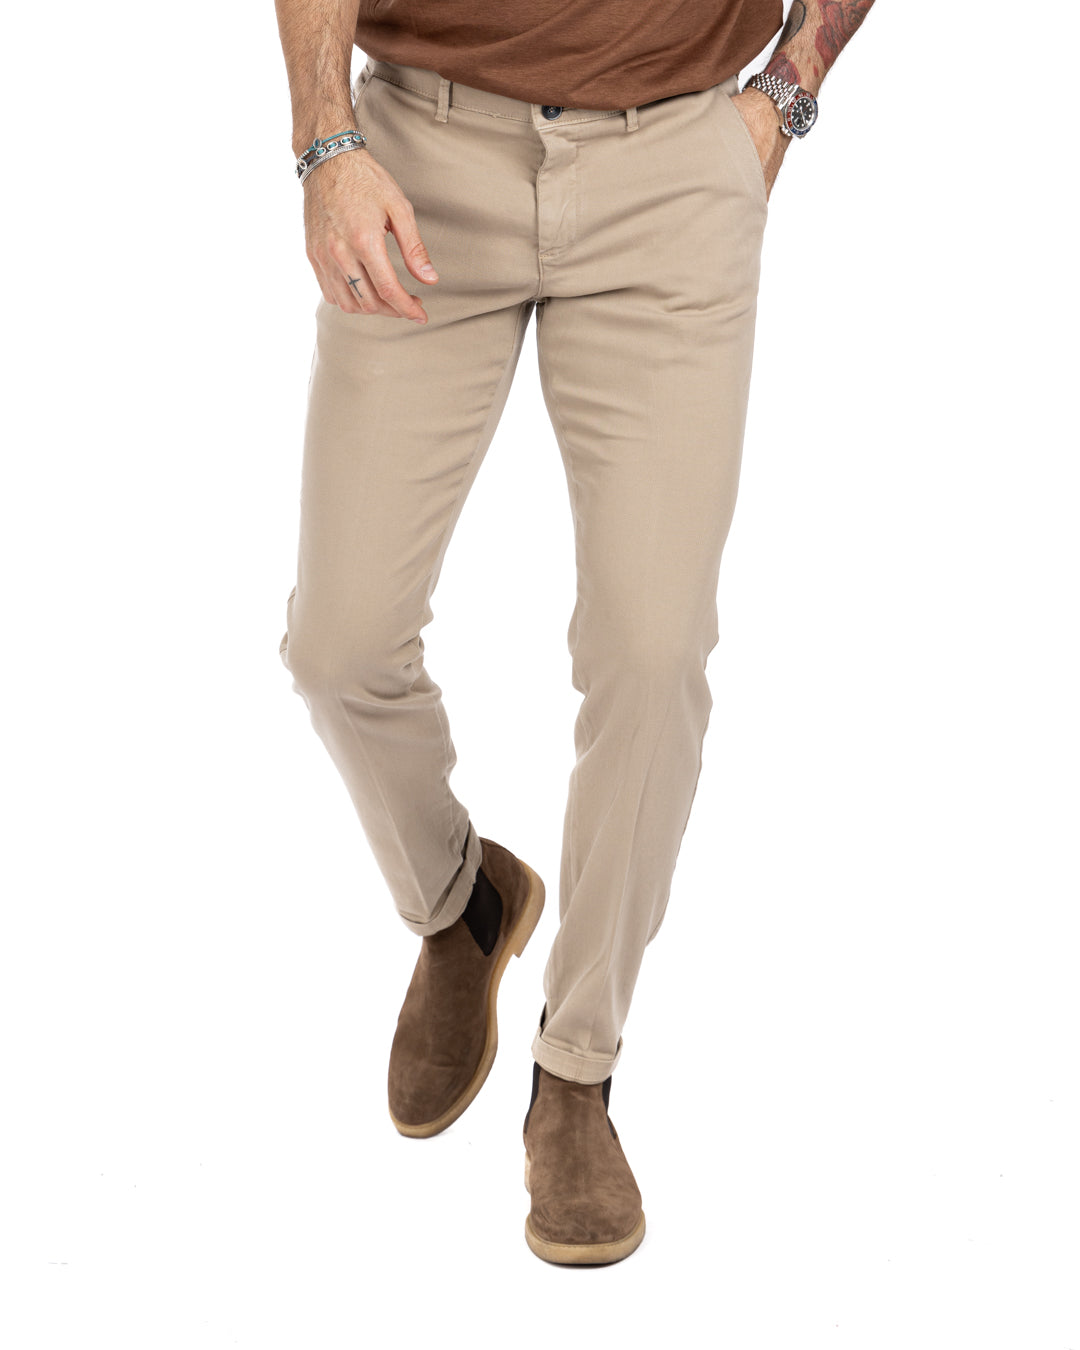 Jack - beige armored trousers